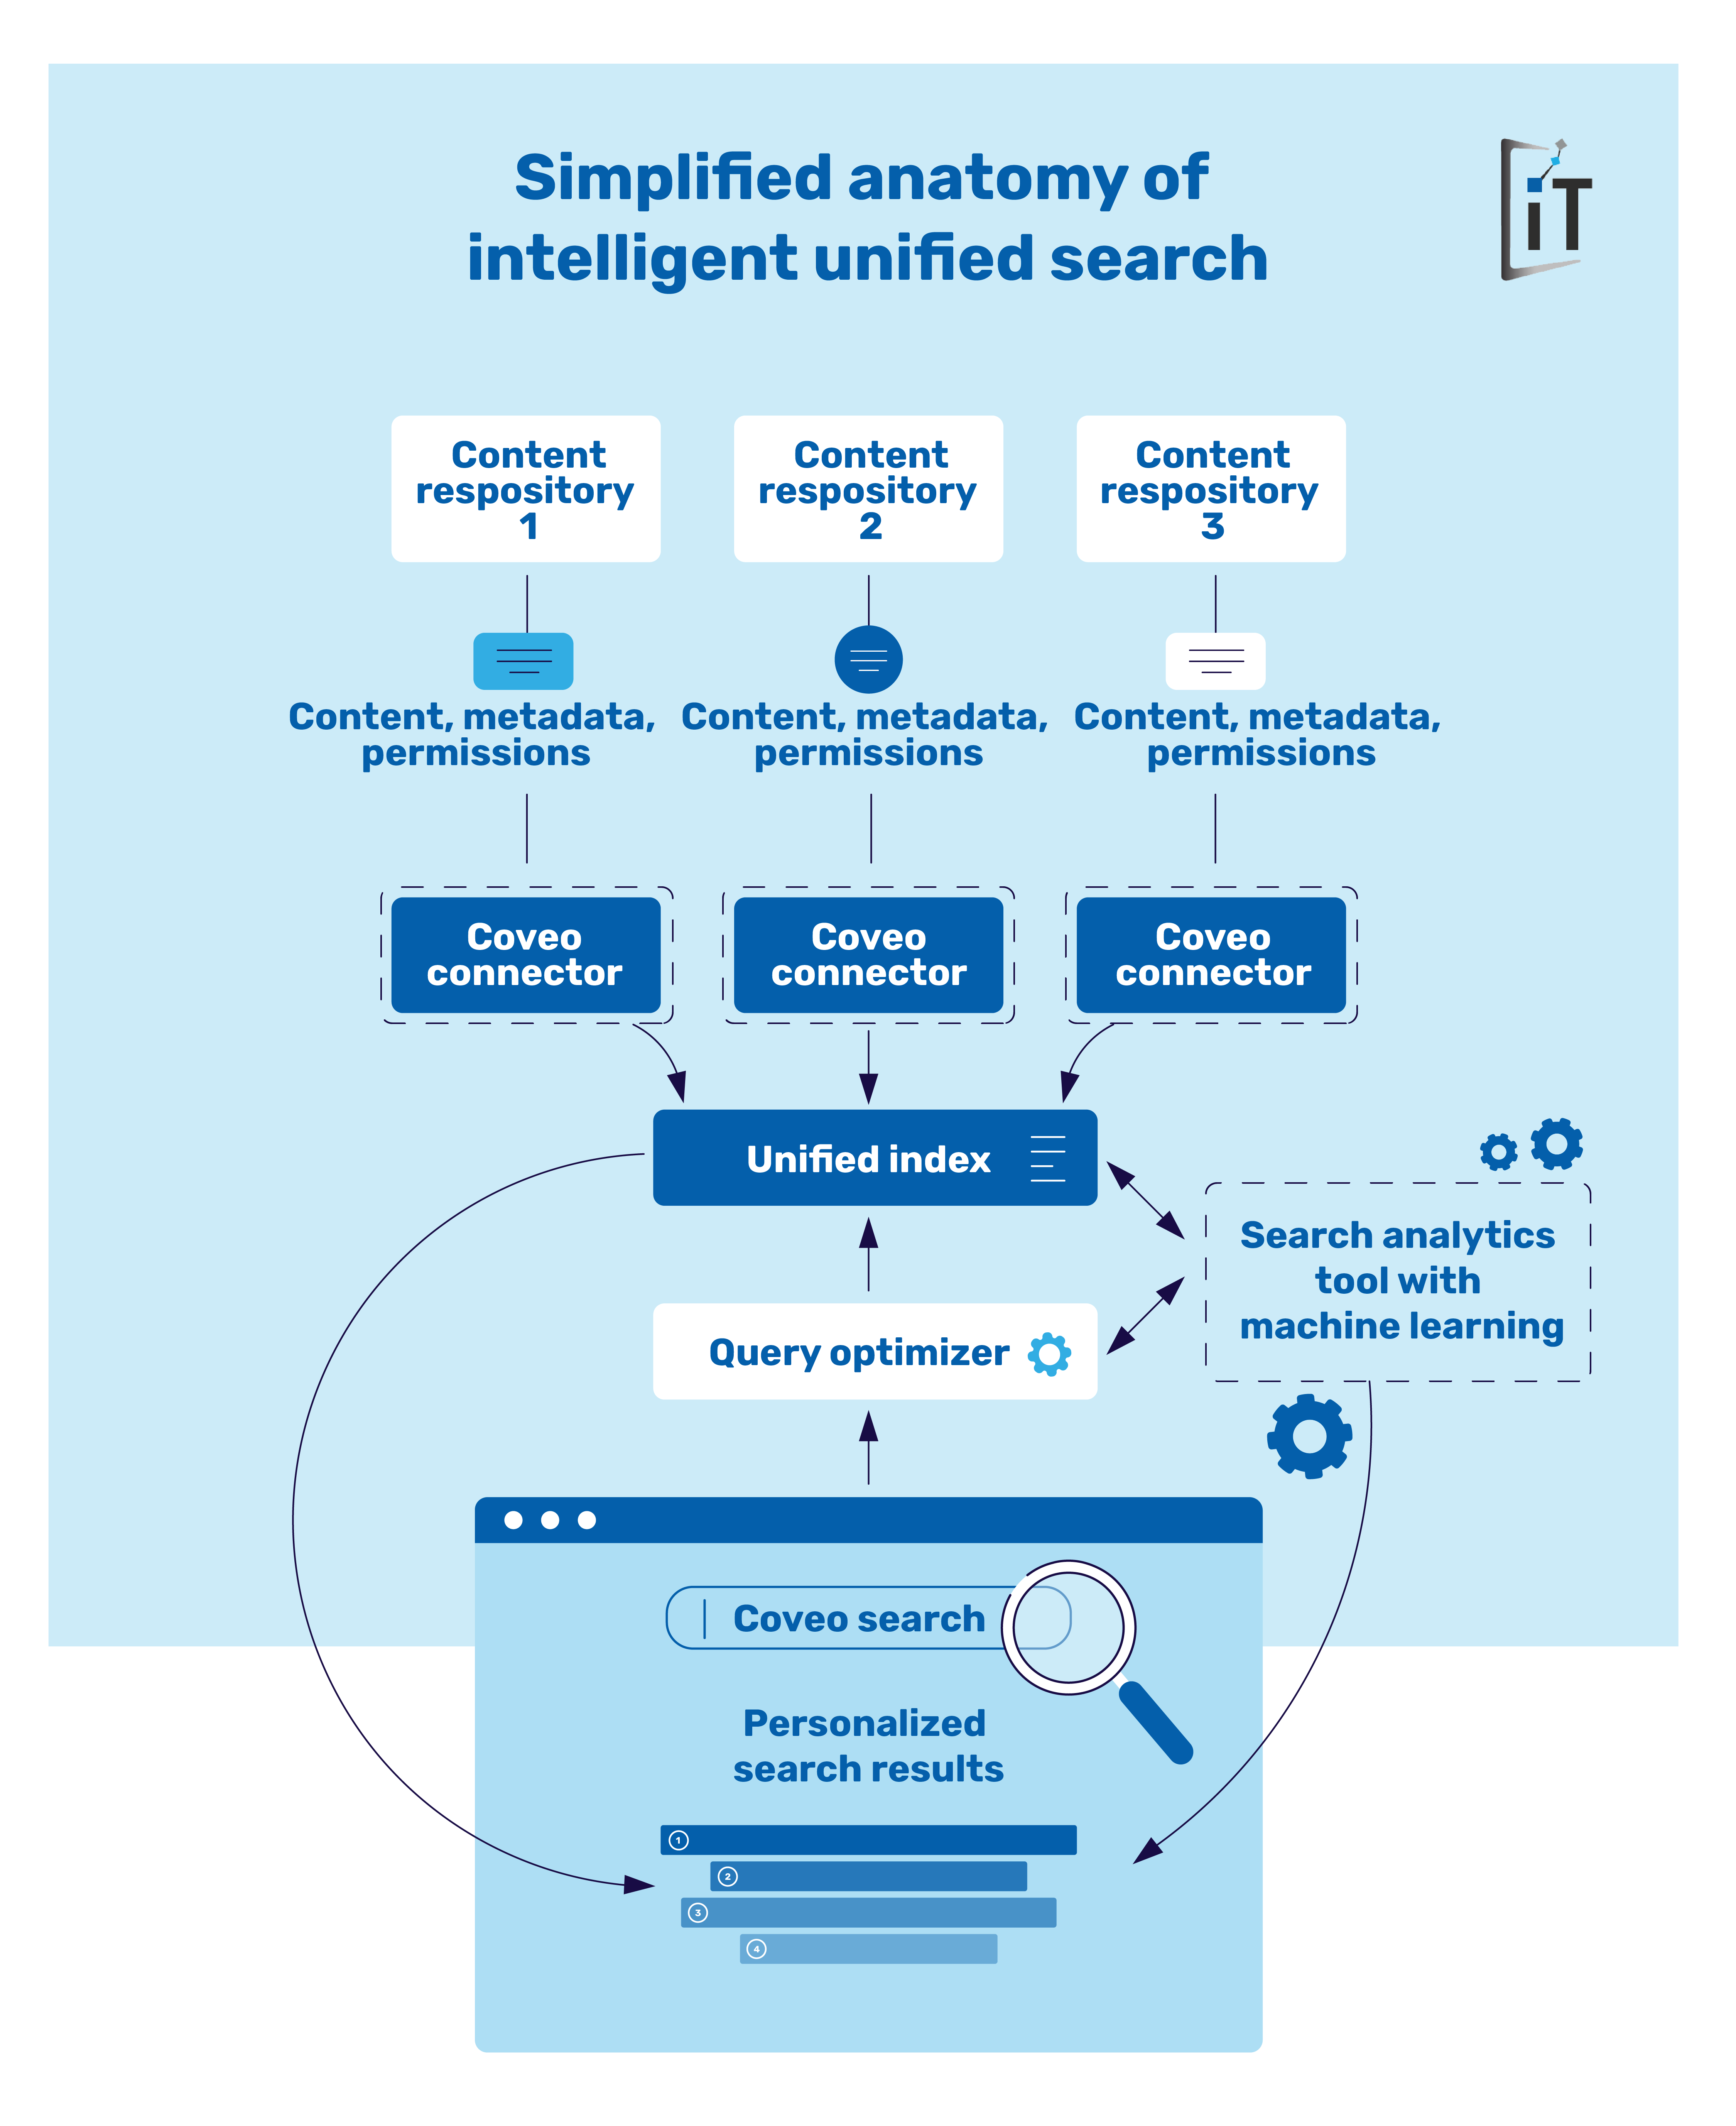 coveo_search_infographic_itd